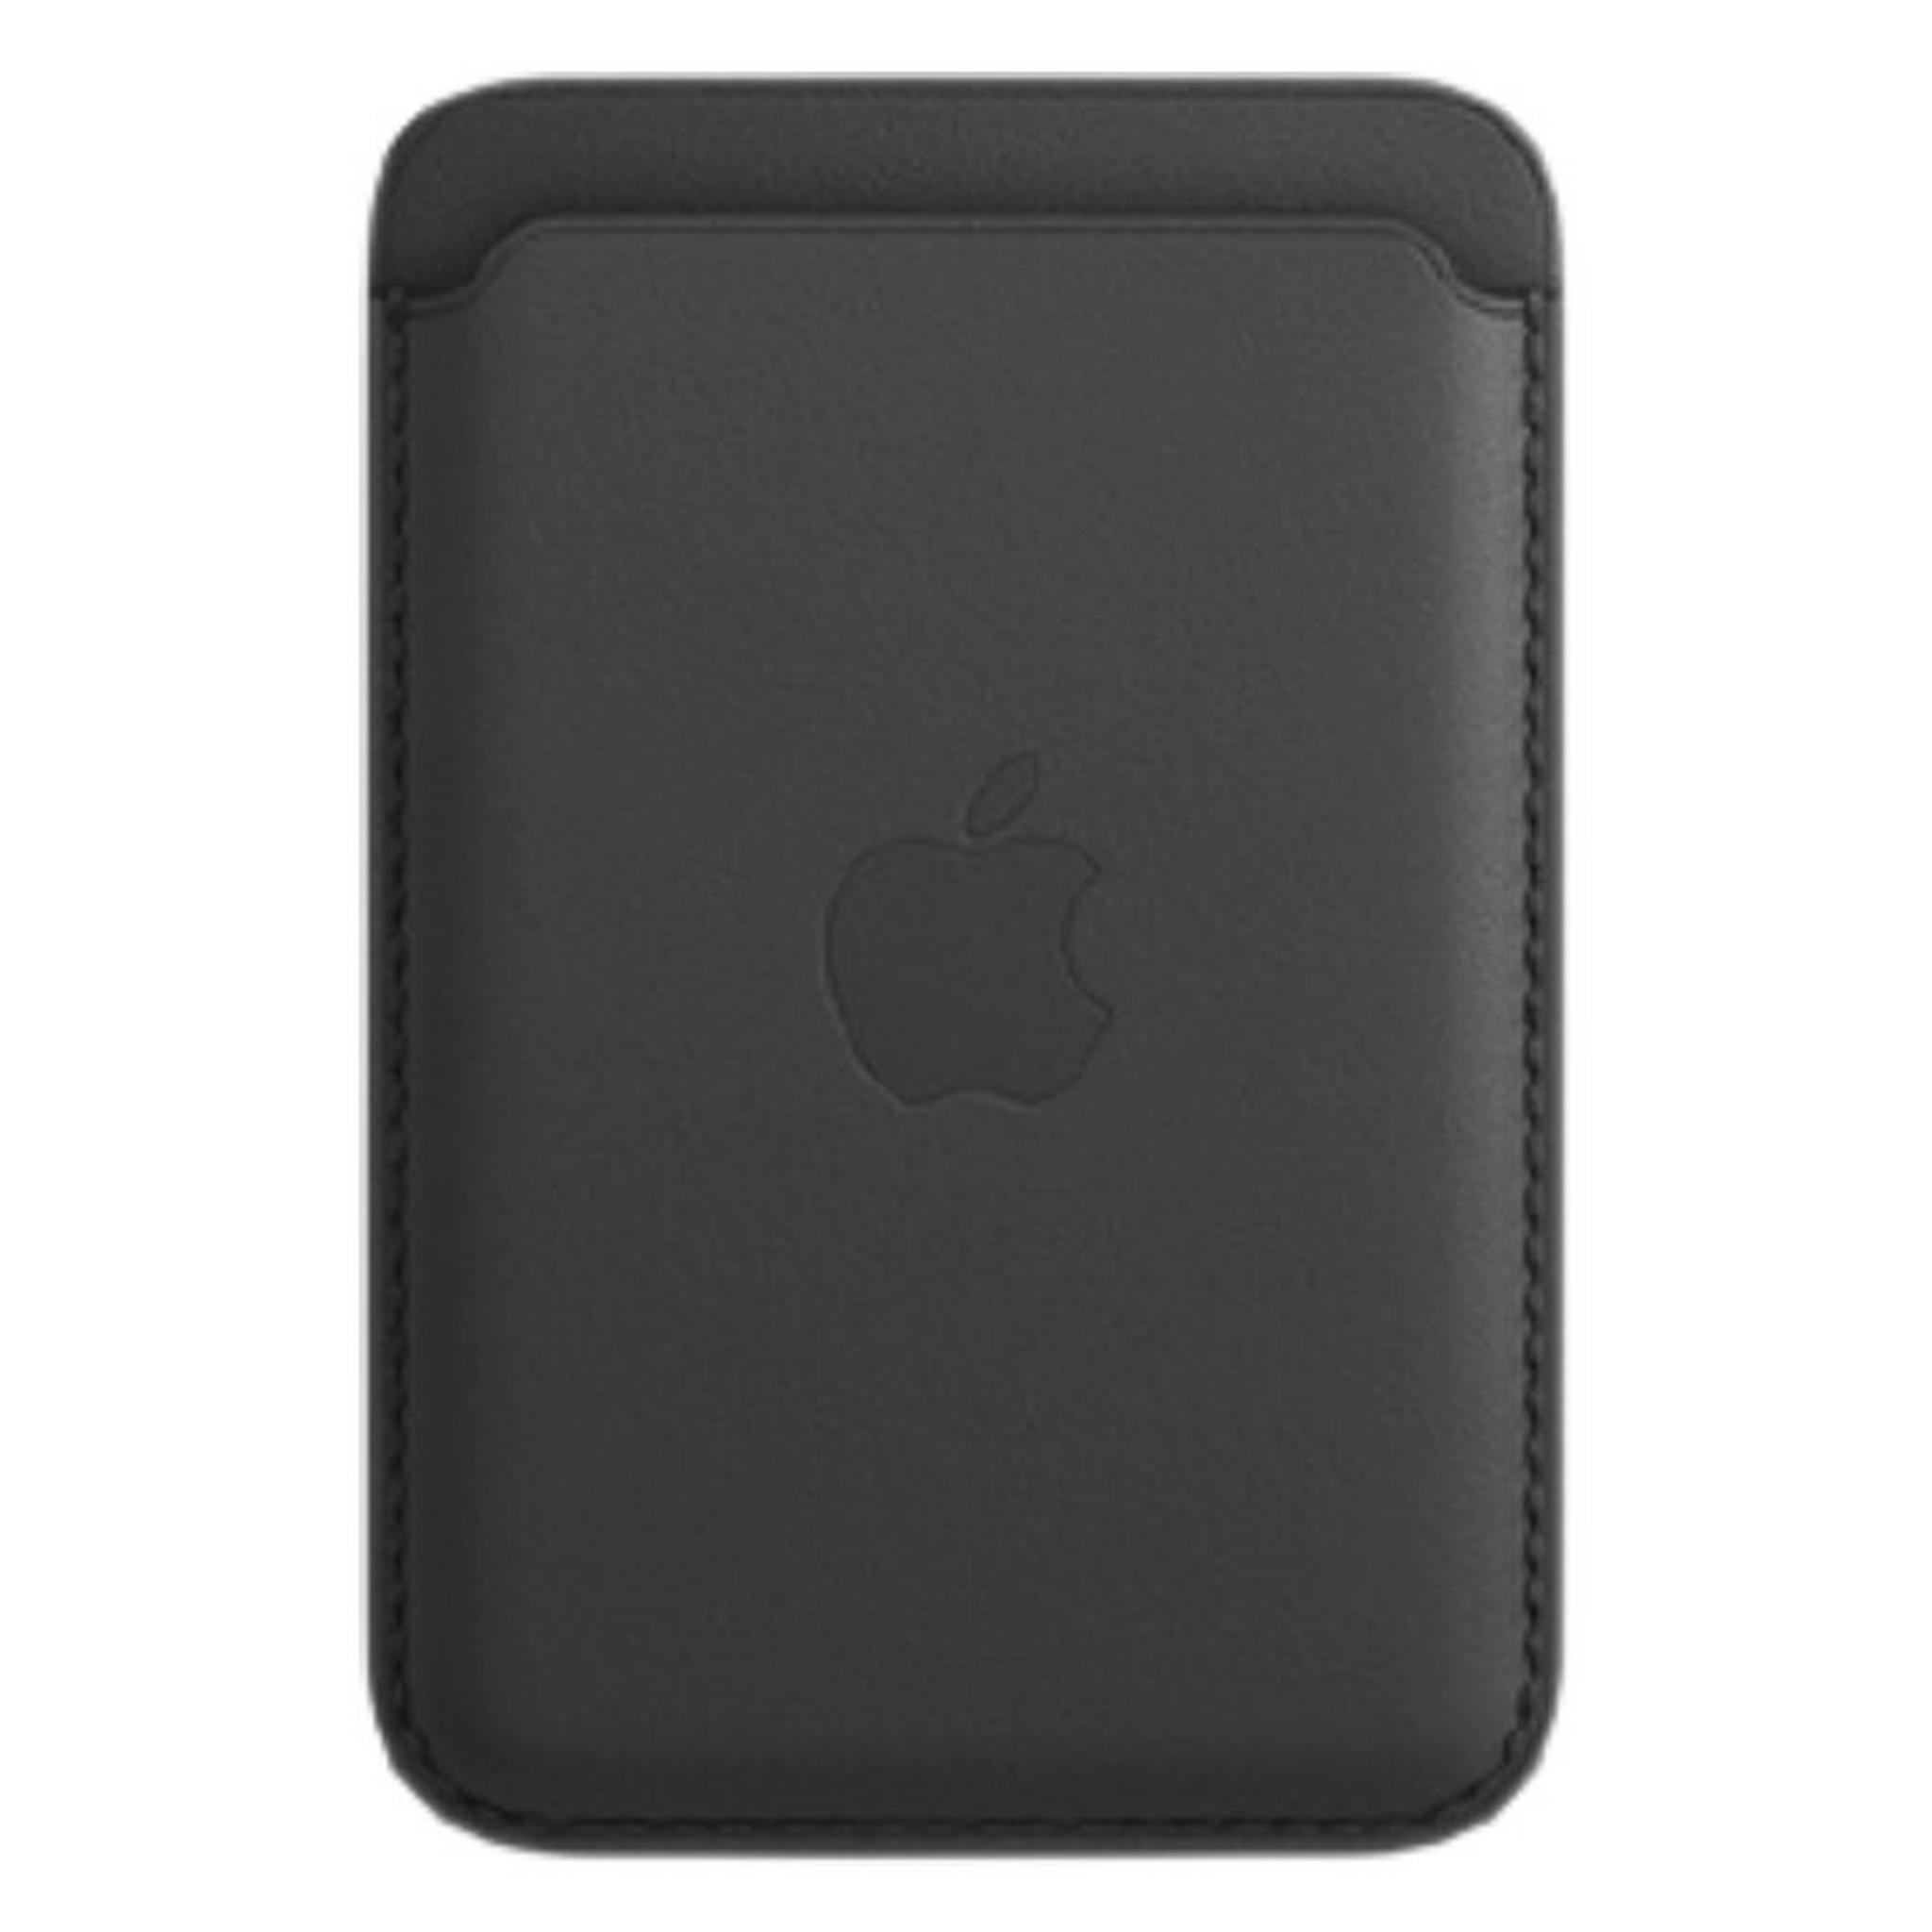 Apple iPhone Magsafe Leather Wallet - Black